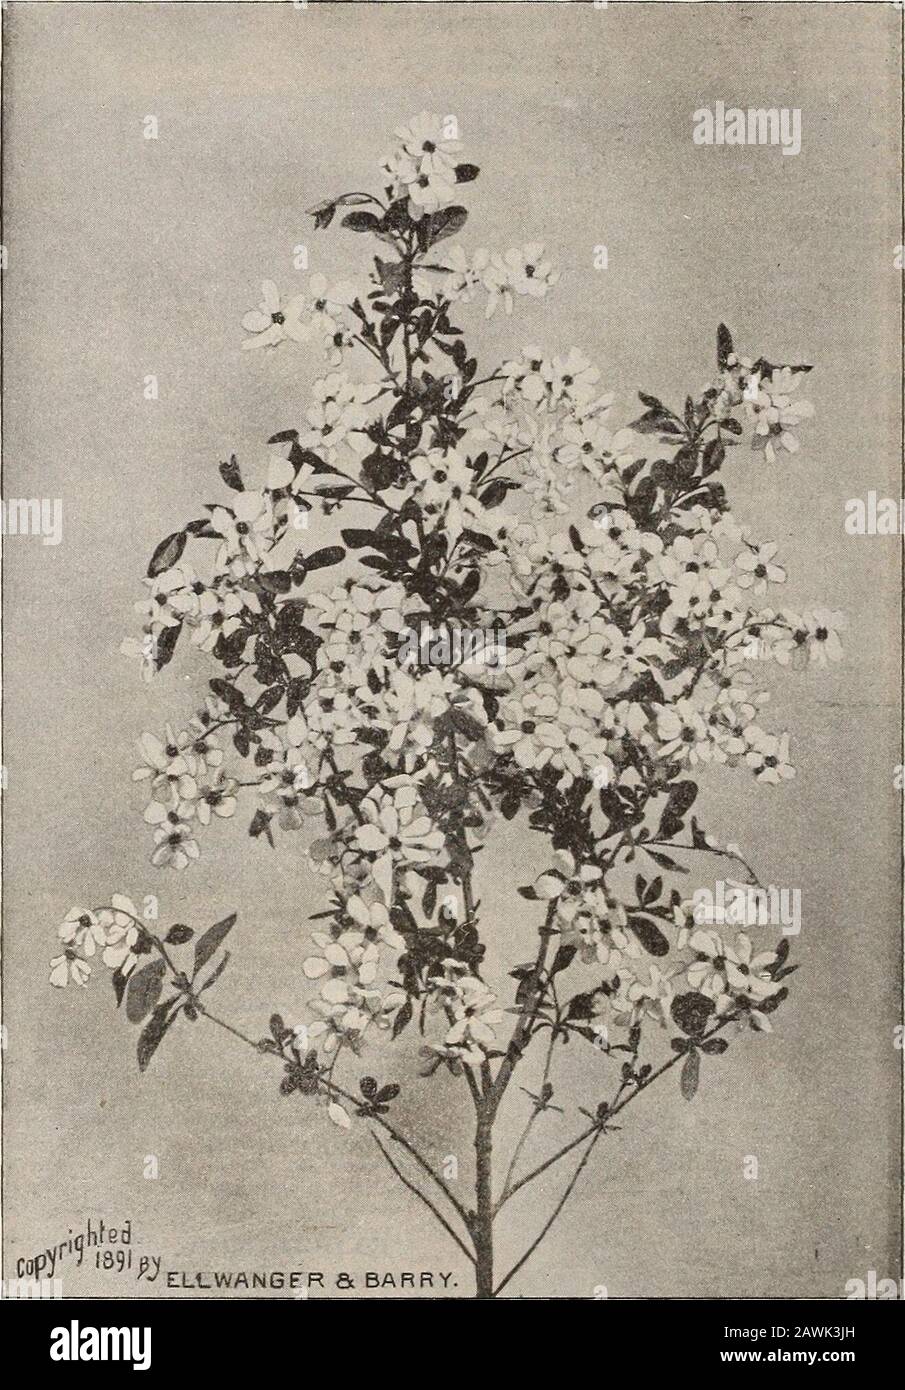 General catalogue of fruit and ornamental trees, shrubs, roses, etc . DA. Exochobda, Ger. grandiflora. C. From North China. A fine shrub, produc-ing large white flowers in May. DiflBcult to propagateand always scarce. One of the finest shrubs of its sea-son. (See cut.) 11.00. FOKSYTHIA. Golden Bell. Forsythie, Fr. These are pretty shrubs, of medium size. All natives of Chinaand Japan. The flowers are drooping, yellow, and appear veryearly in spring before the leaves. The best very early flowermgshrubs. F. Fortuneii. FORTUNES FORSYTHIA. D. Growth upright,foliage deep green, flowers bright yello Stock Photo